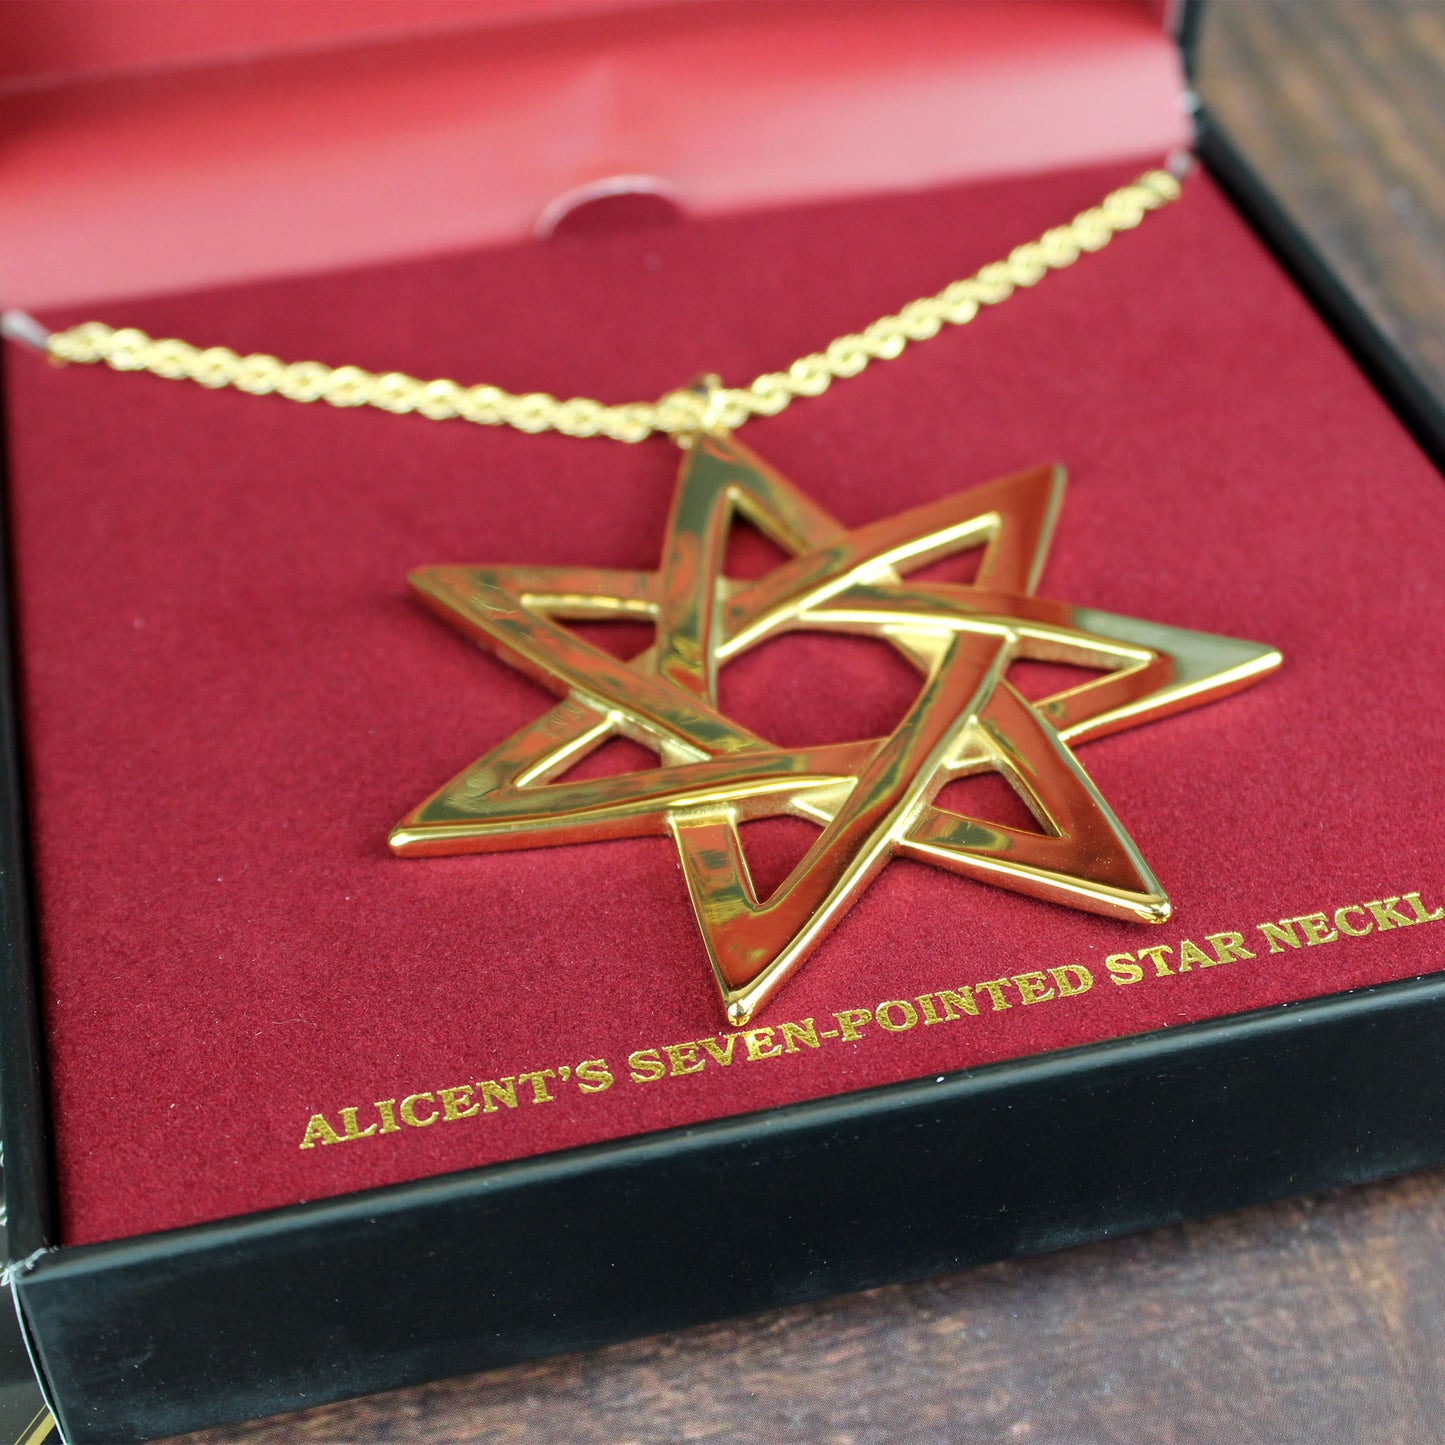 Alicent's Seven-Pointed Star Necklace (House of the Dragon) Prop Replica Necklace